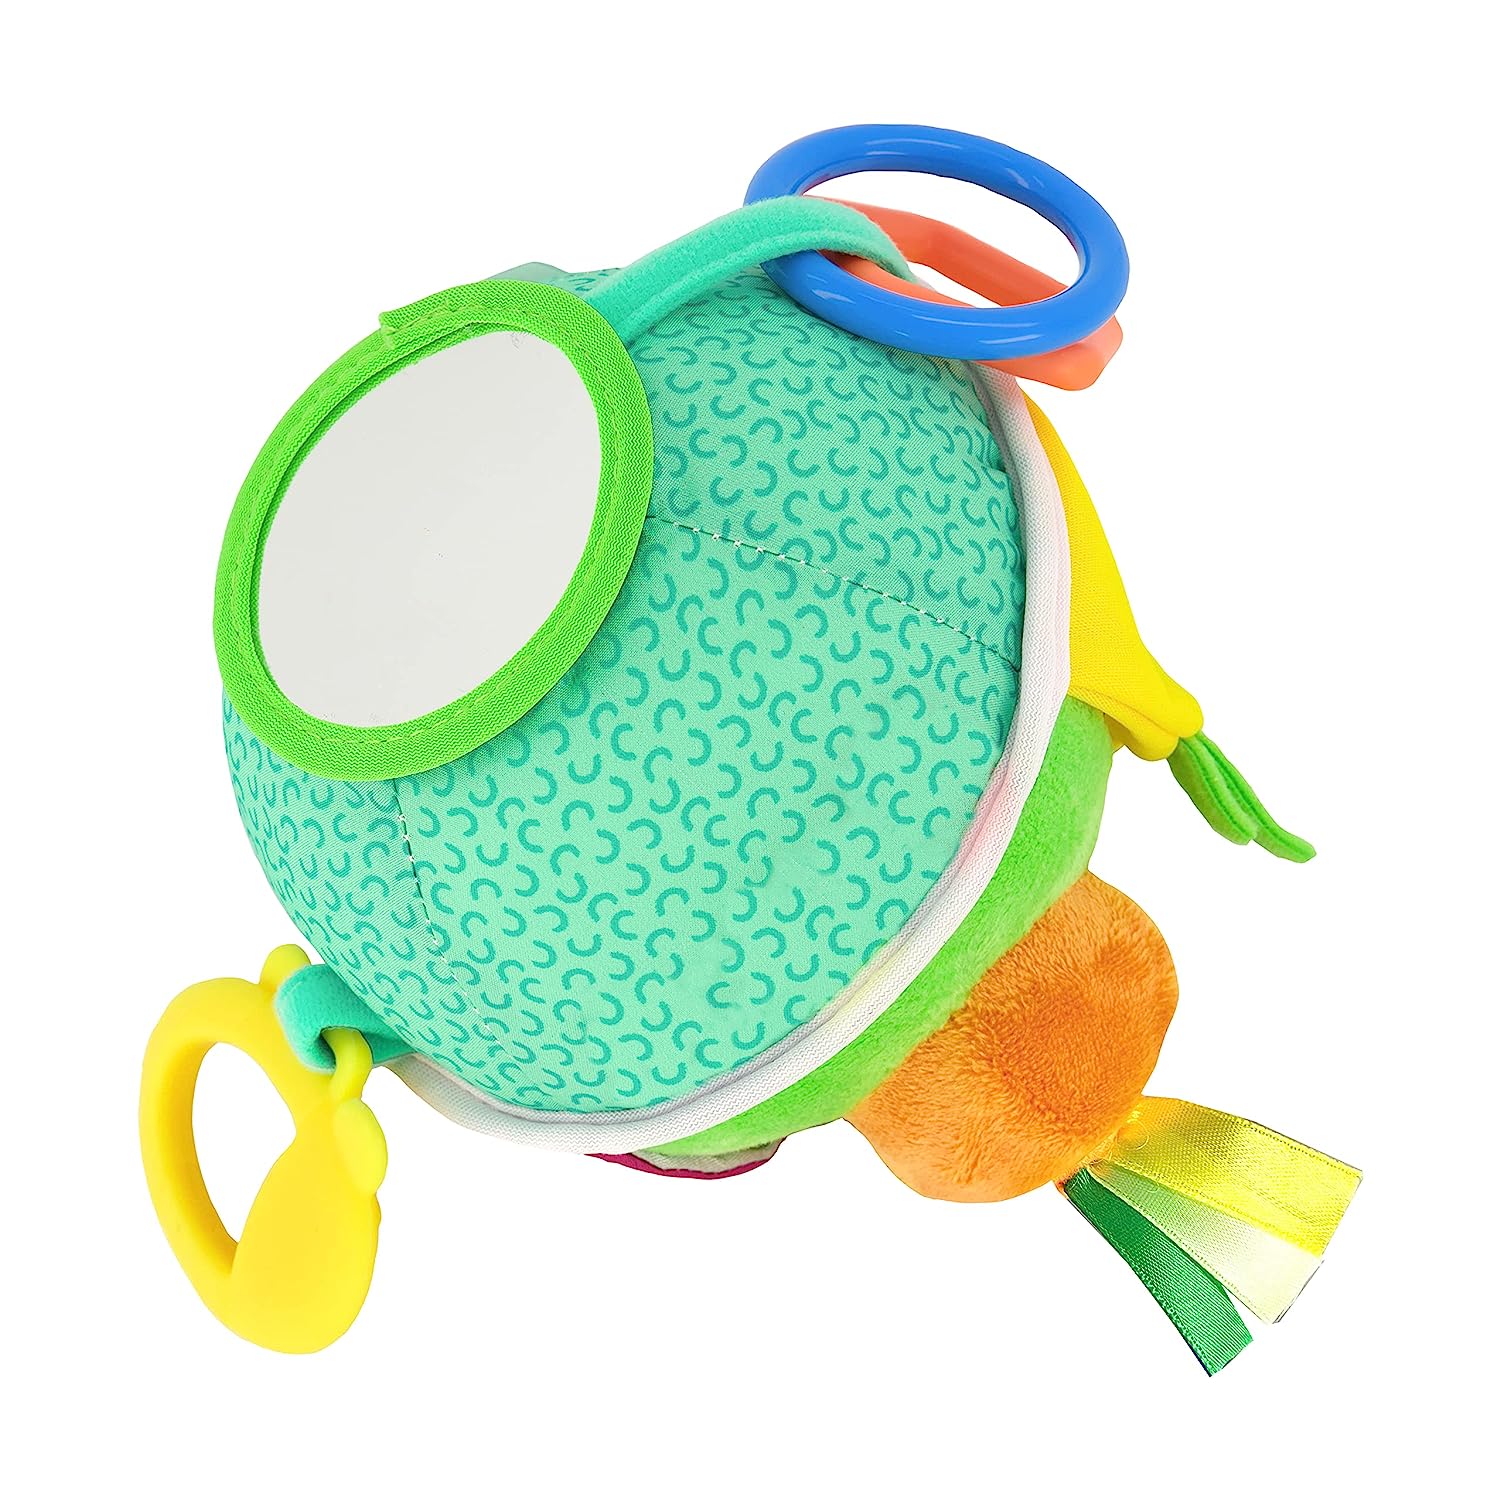 Infantino Busy Lil’ Sensory Ball - 9 Activities, Teether, Selfie Mirror, Rattle Sounds, Encourages Fine and Gross Motor Skill Development, for Babies 3M+.